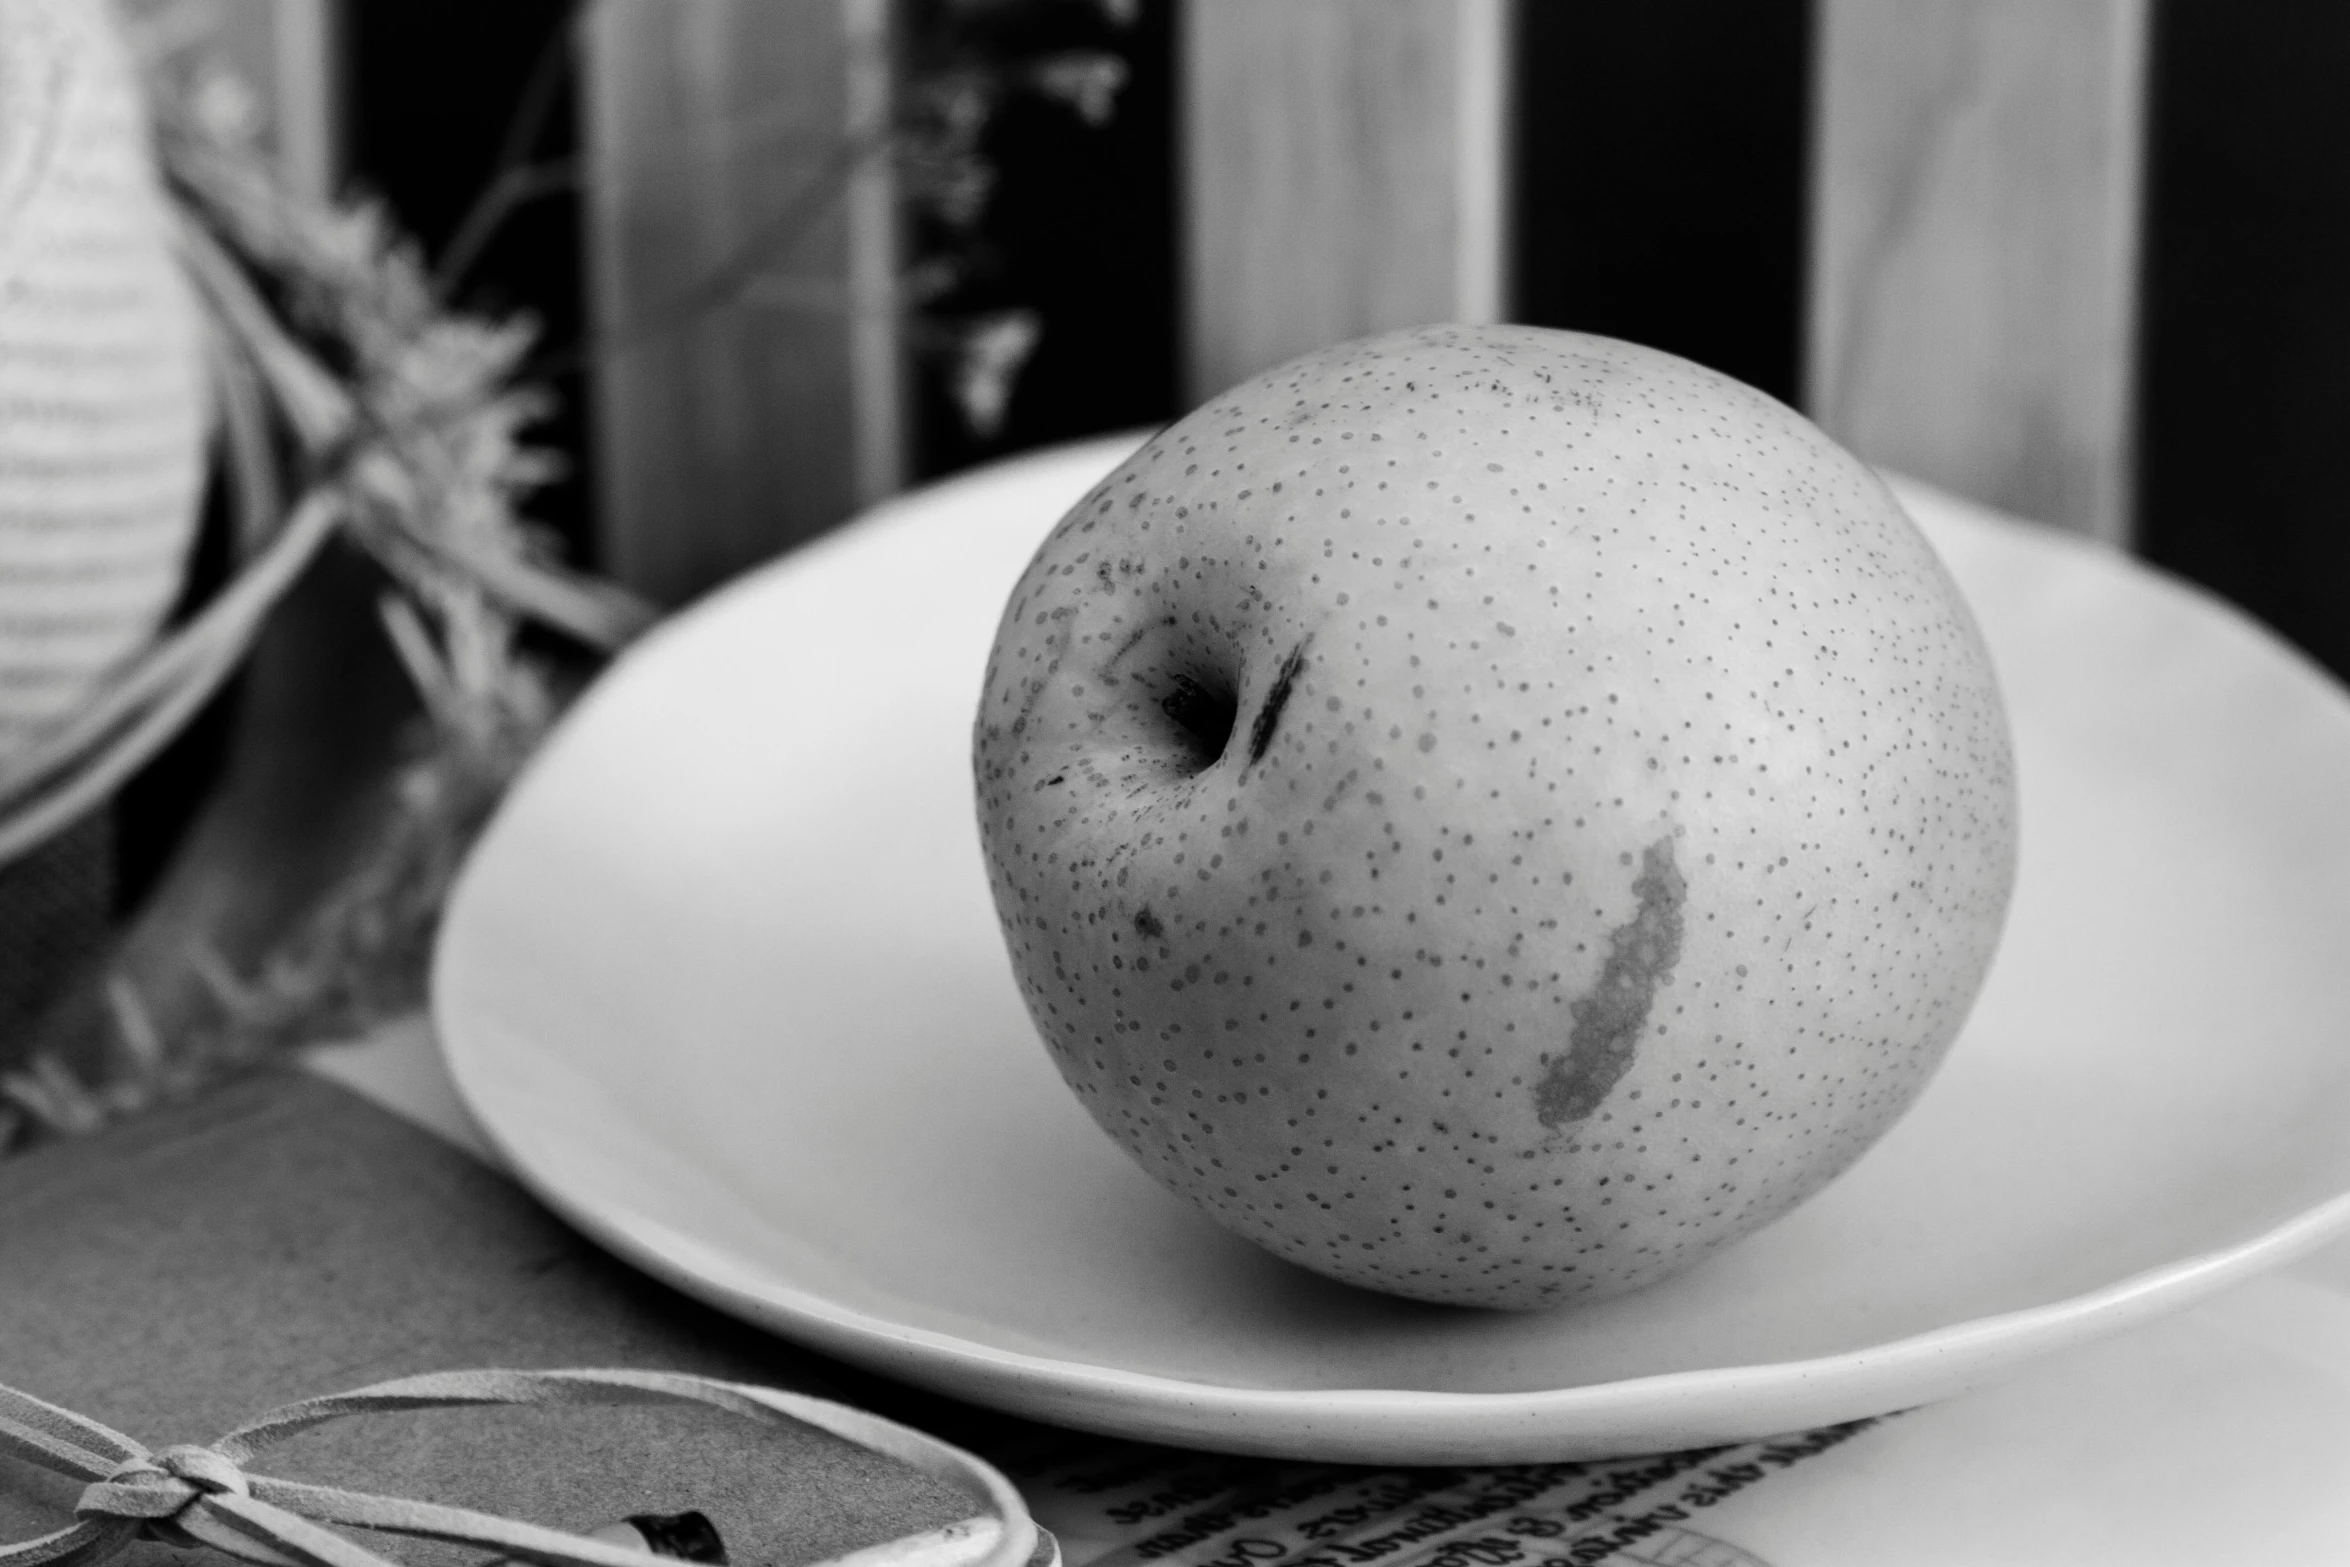 an apple and pair of scissors are sitting on the table